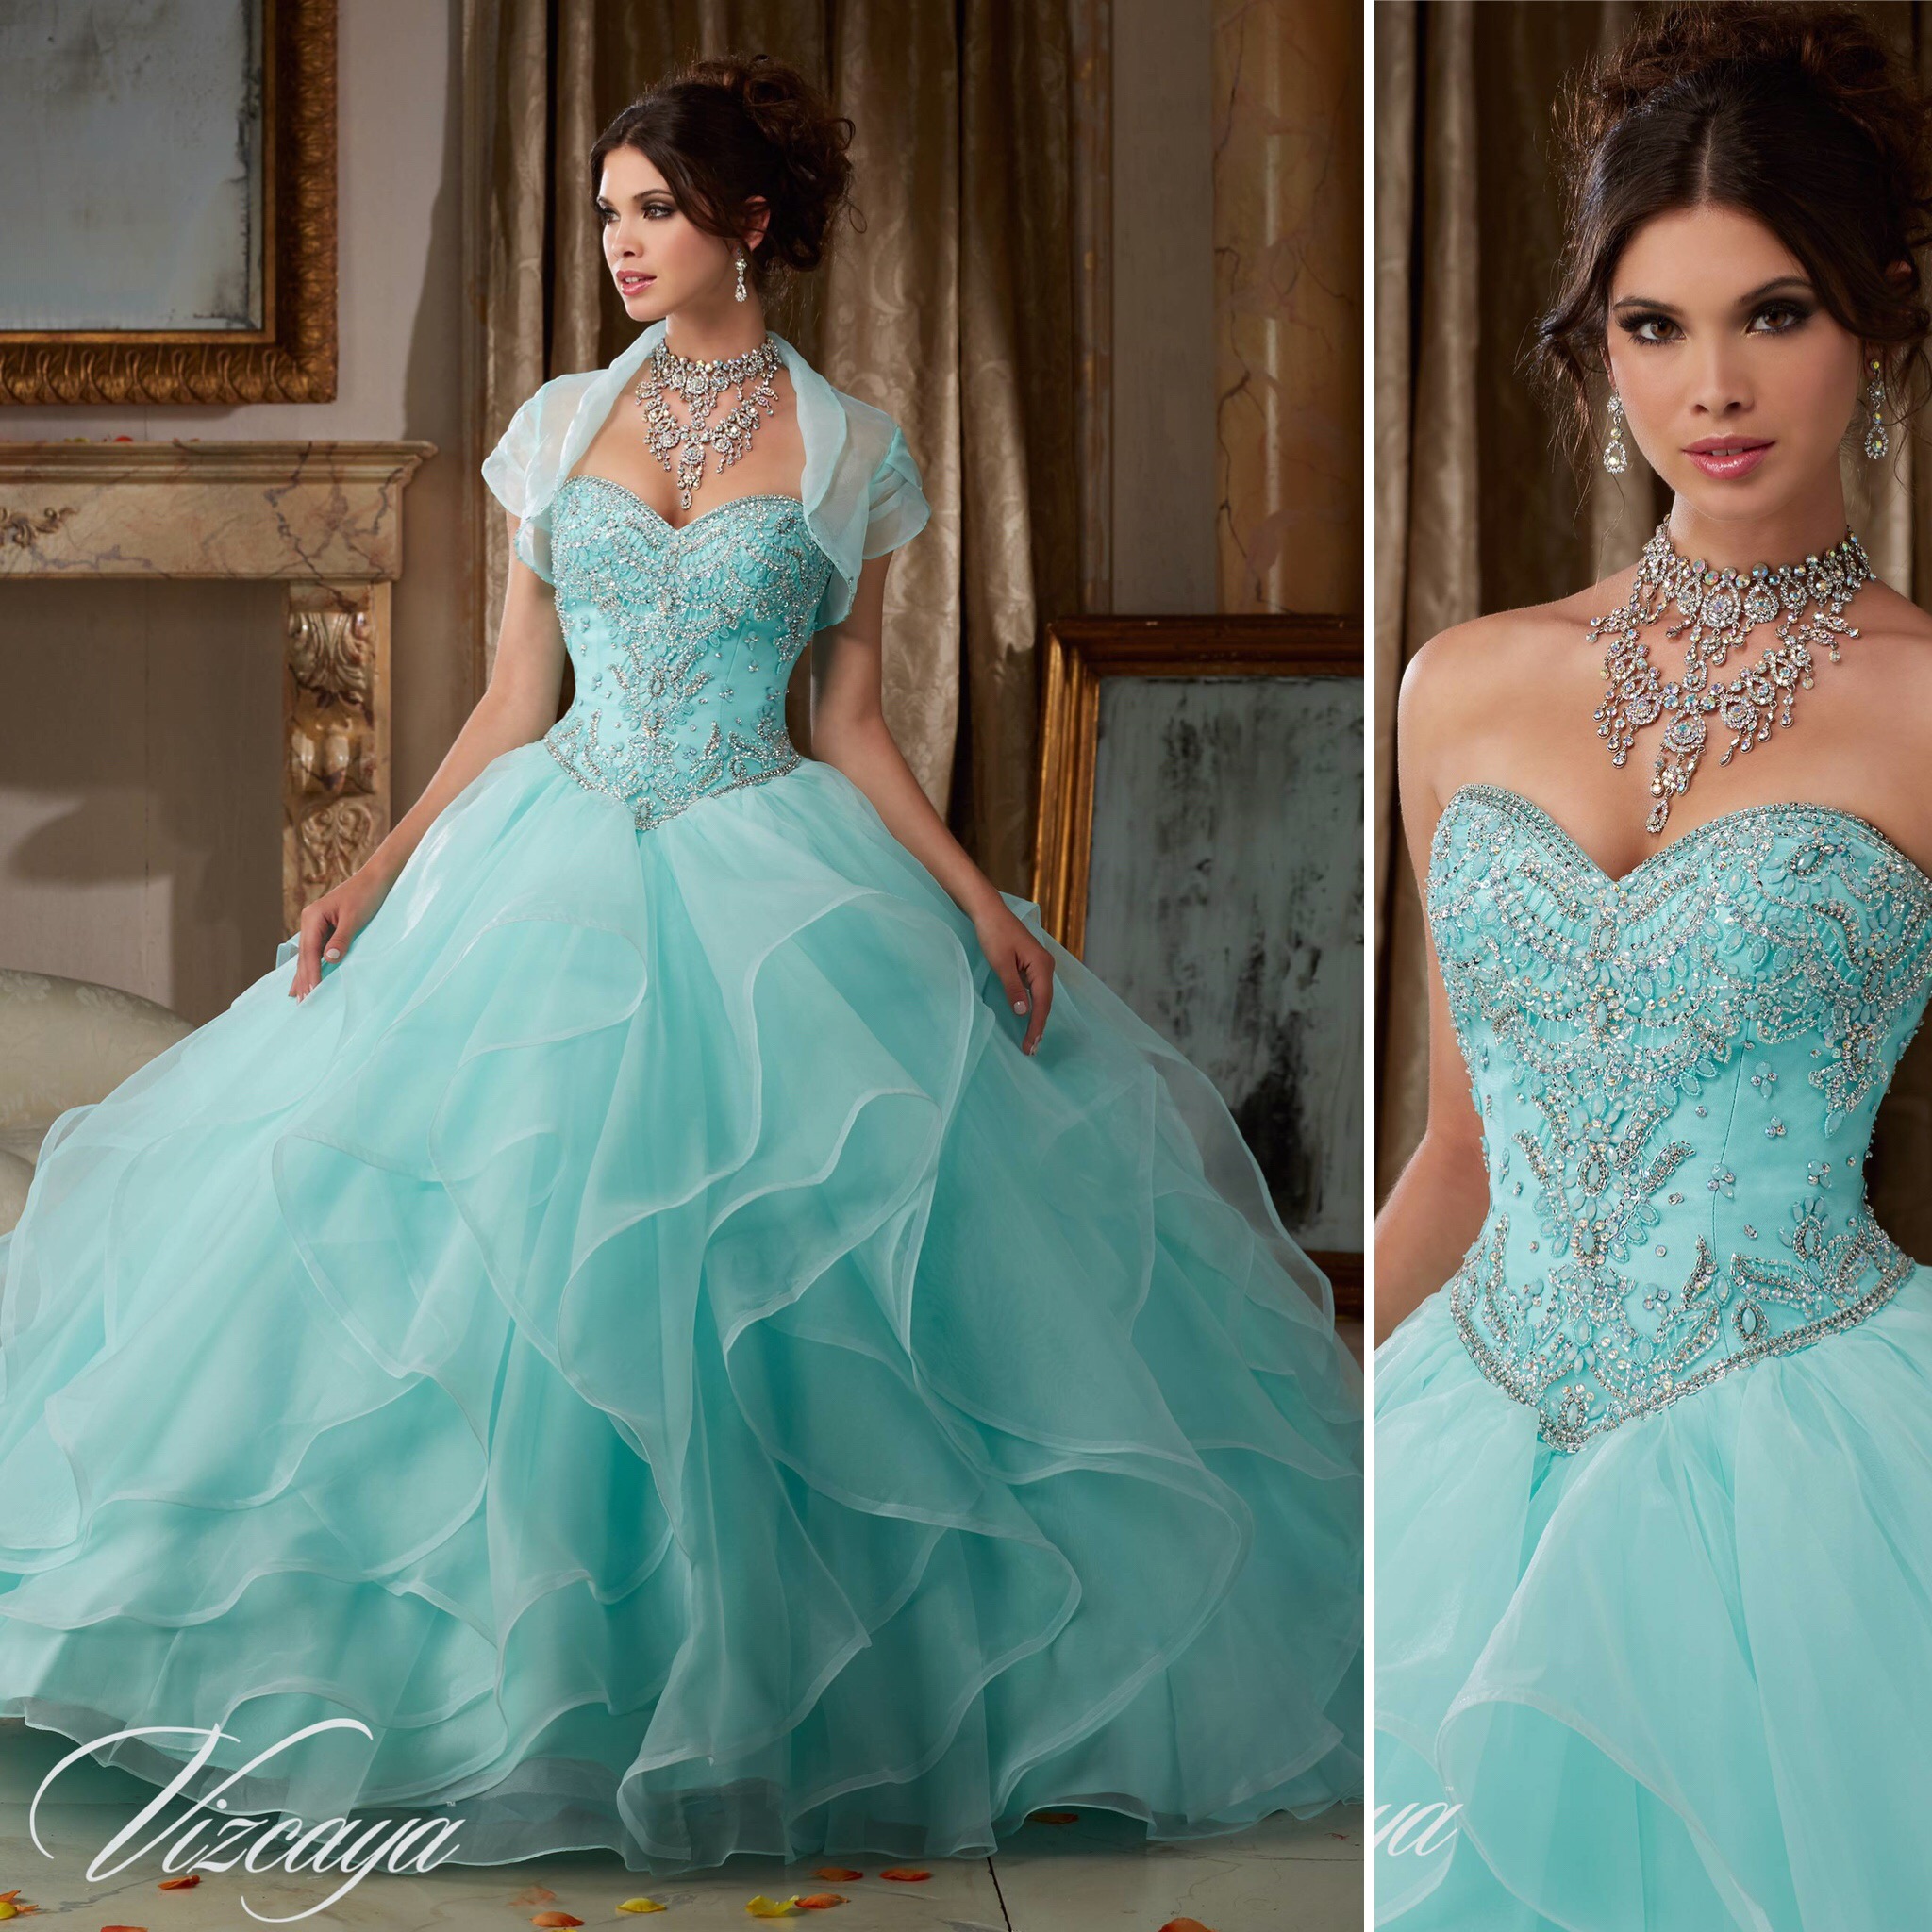 Marus Boutique Quinceanera and Prom Dresses  Round Rock TX 